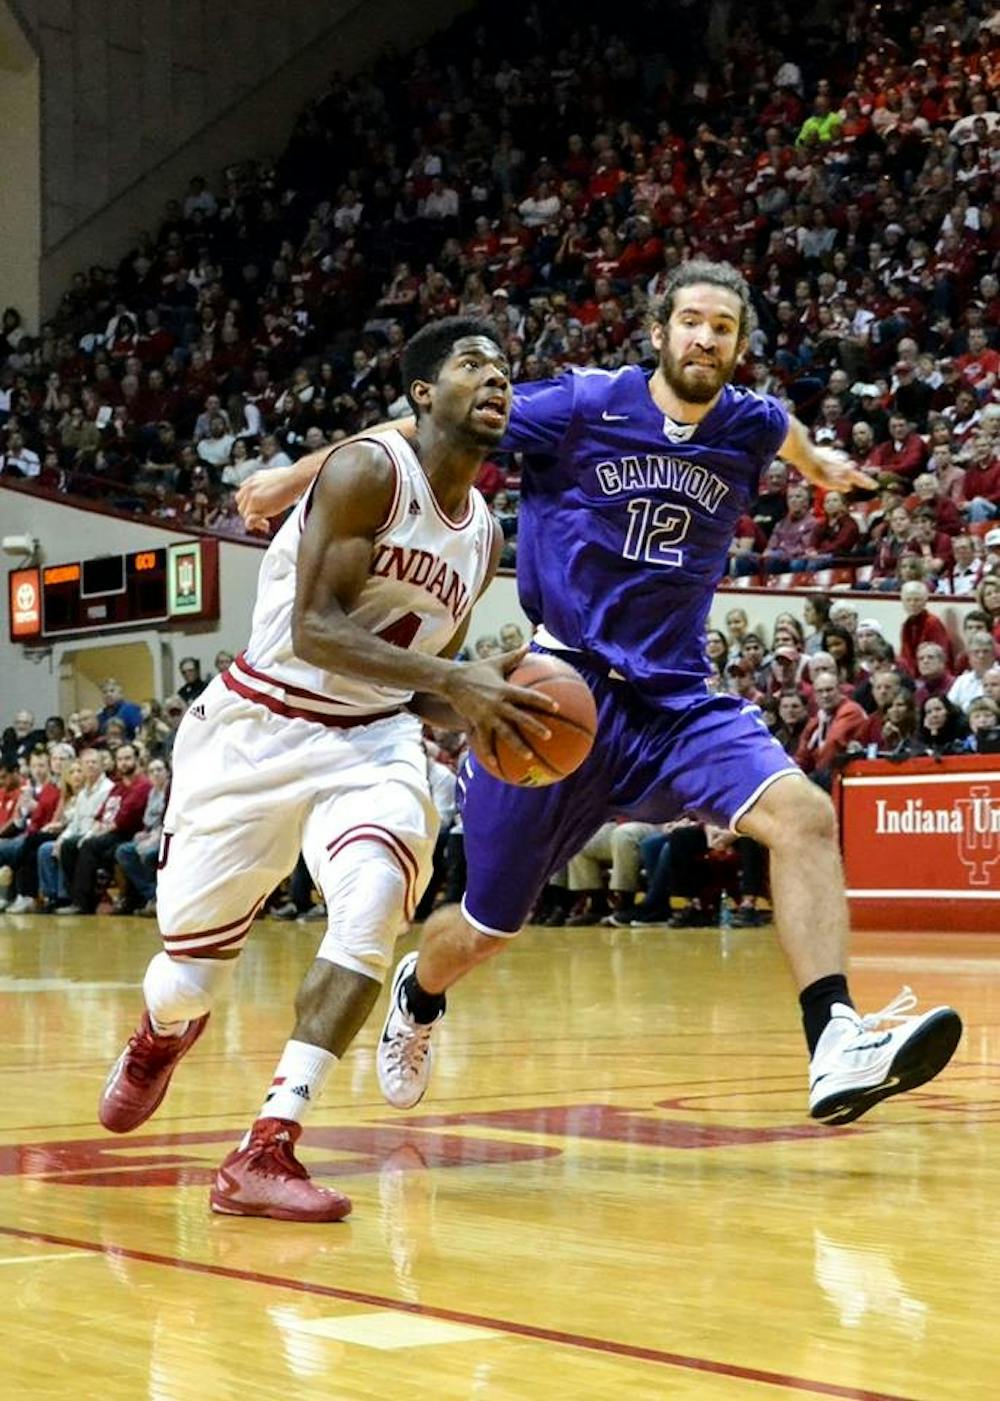 Freshman guard Robert Johnson looks for the basket during Saturday's game against Grand Canyon University at Assembly Hall.